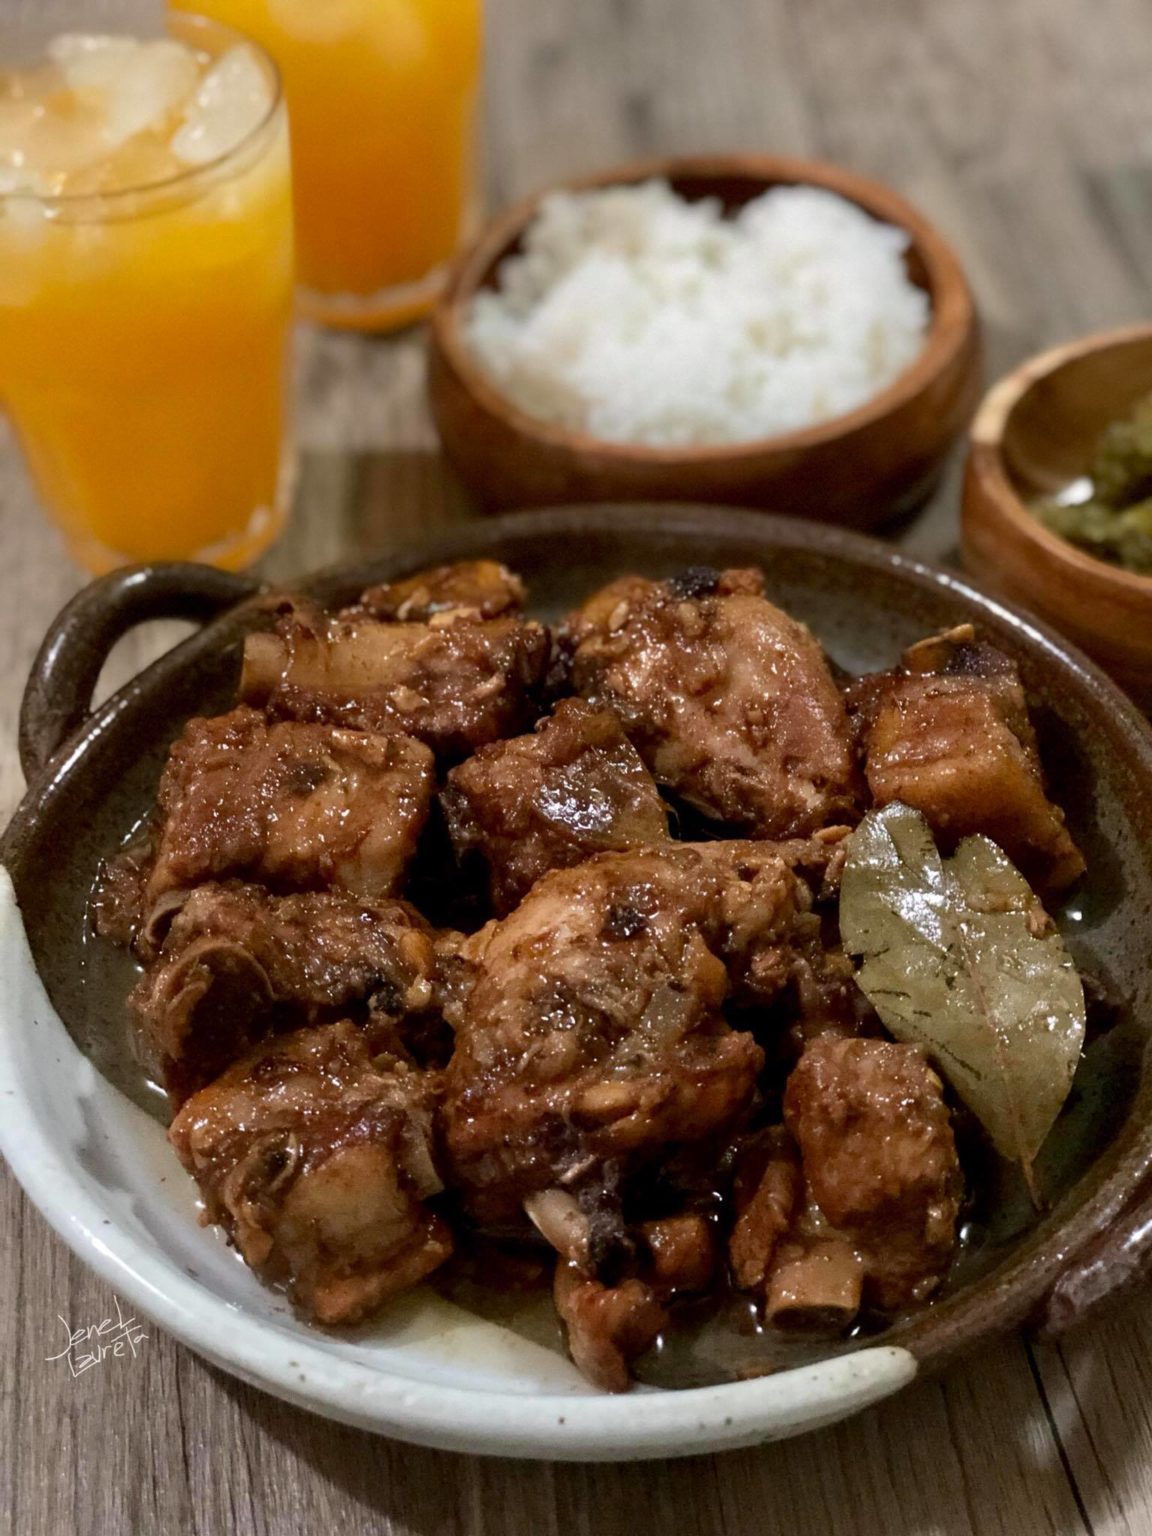 informative essay on how to cook adobo